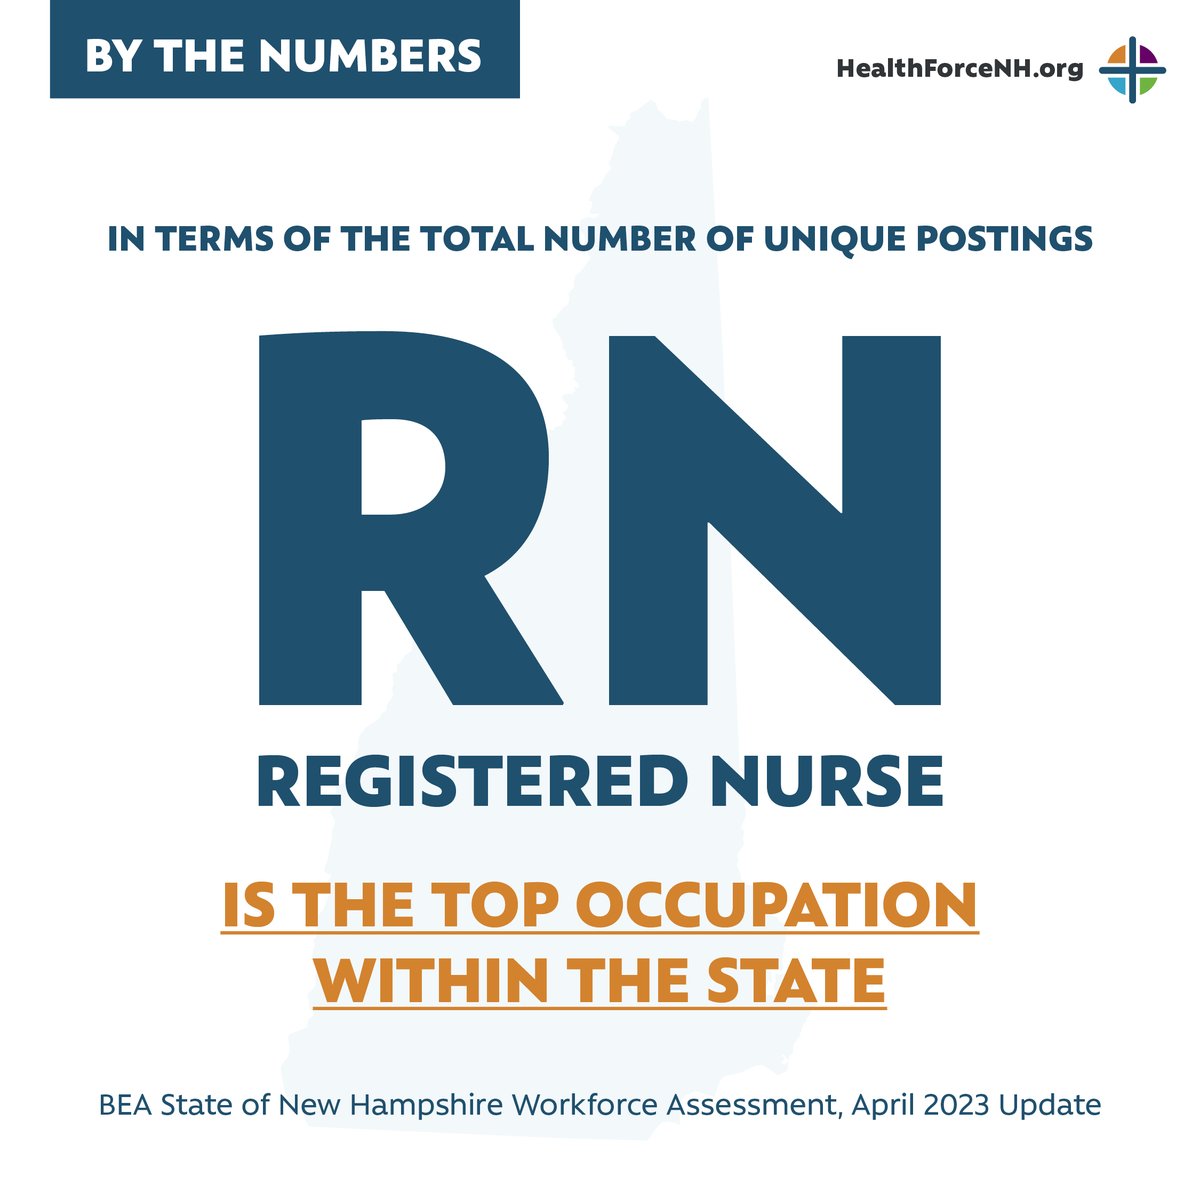 Registered Nurses hold the top occupation in NH, so it’s not surprising that they also have one of the highest vacancy rates. How can we meet, maintain, & expand the profession in NH? NH’s Workforce Assessment has insights. @NHEconomy#

#HealthForceNH #NHeconomy #healthcarewo ...